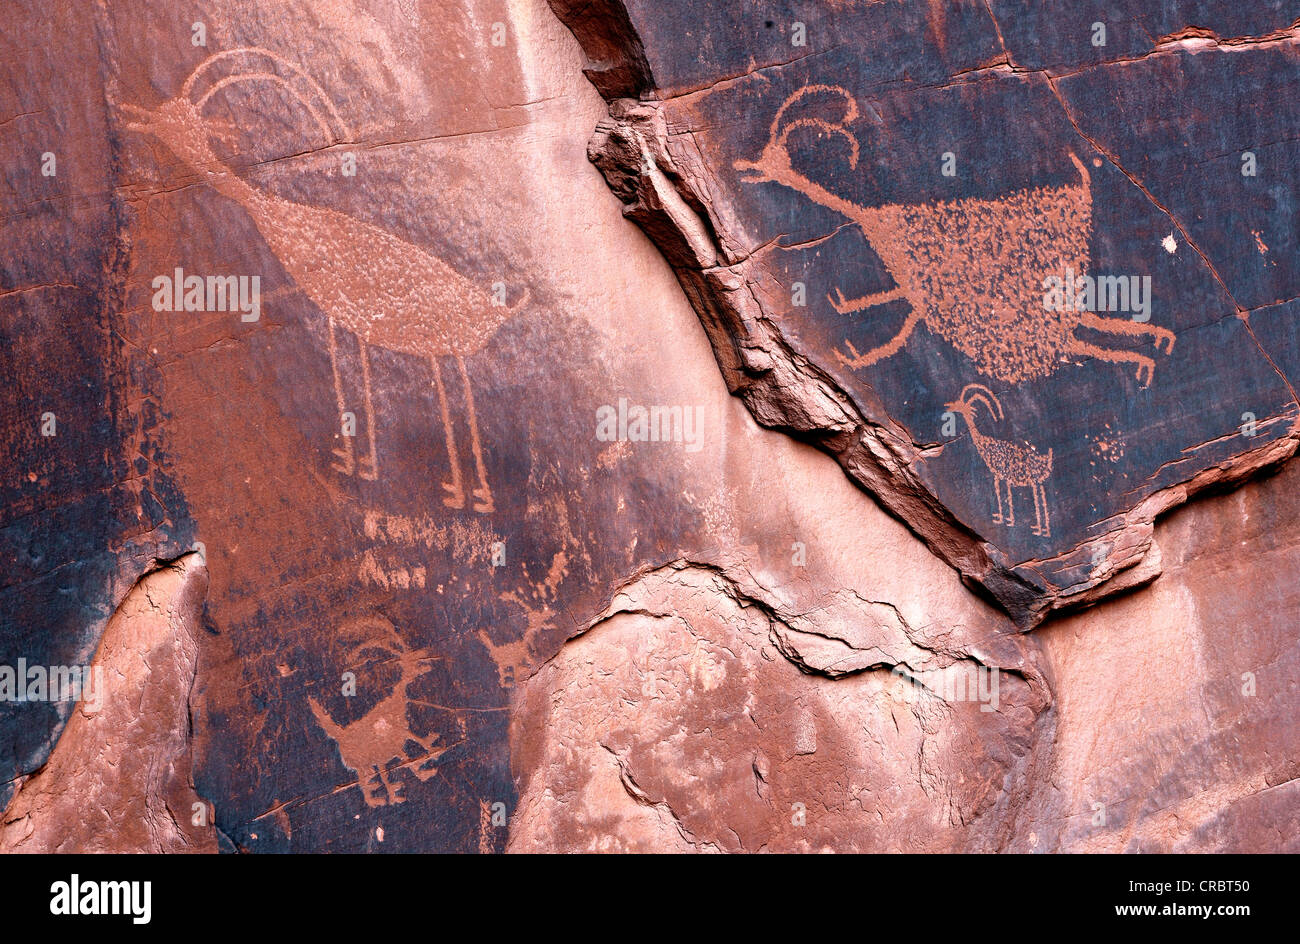 Petroglyphs etched in sandstone, symbols, prehistoric and historic rock art, wall drawings by the Anasazi Native Americans Stock Photo